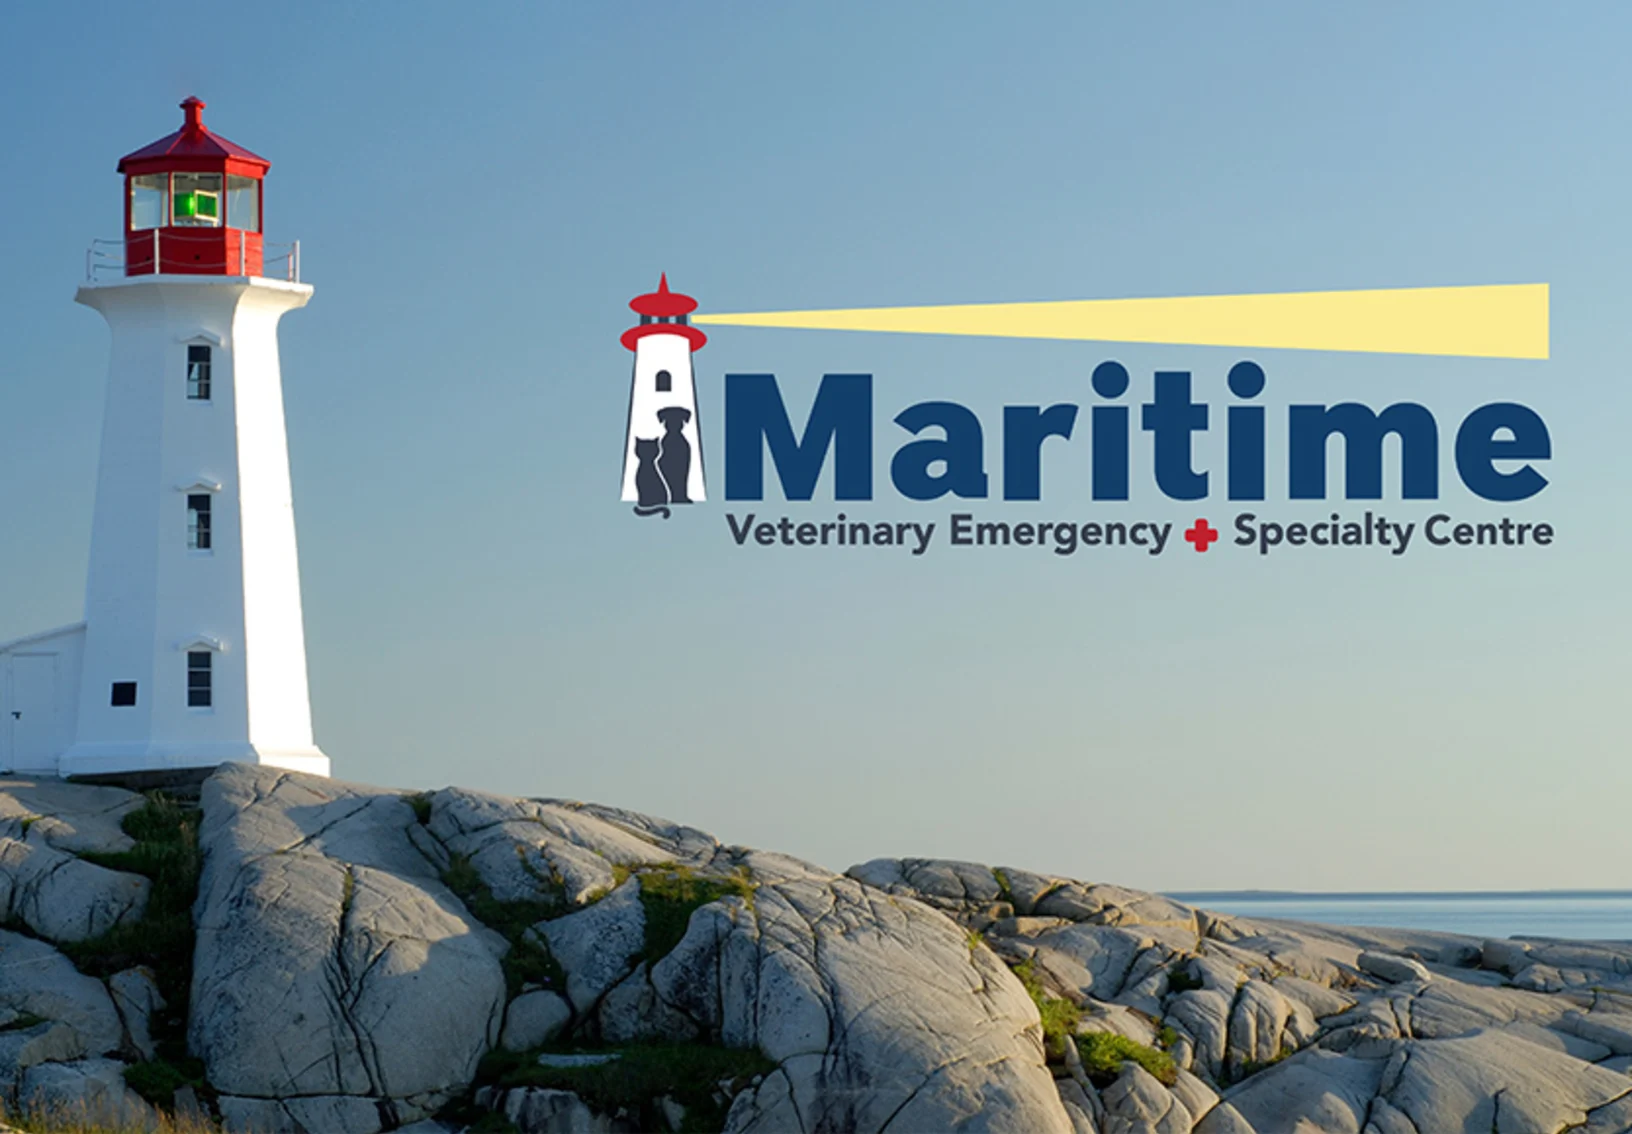 Peggy's Cove with white lighthouse with Maritime Veterinary Emergency and Specialty Centre's logo